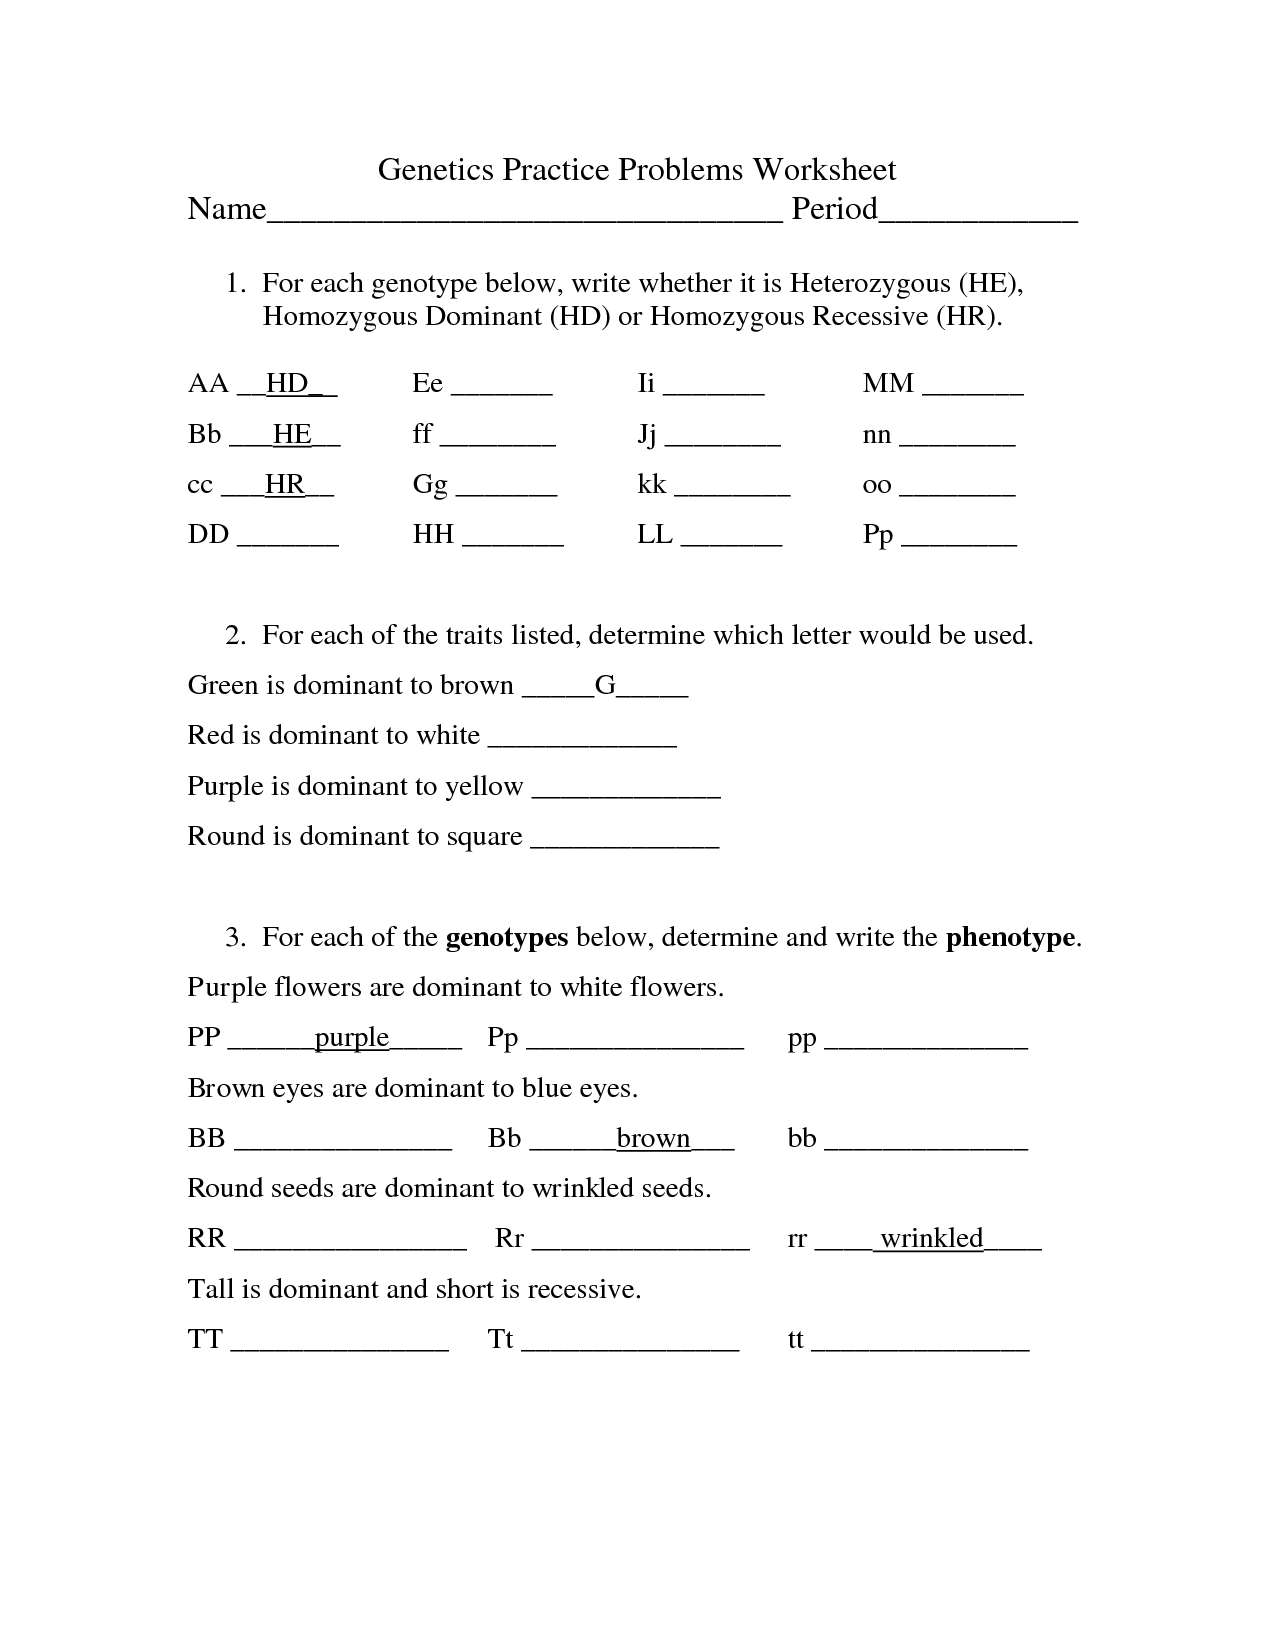 dihybrid-cross-worksheet-answers-awesome-15-best-of-dihybrid-cross-worksheet-answers